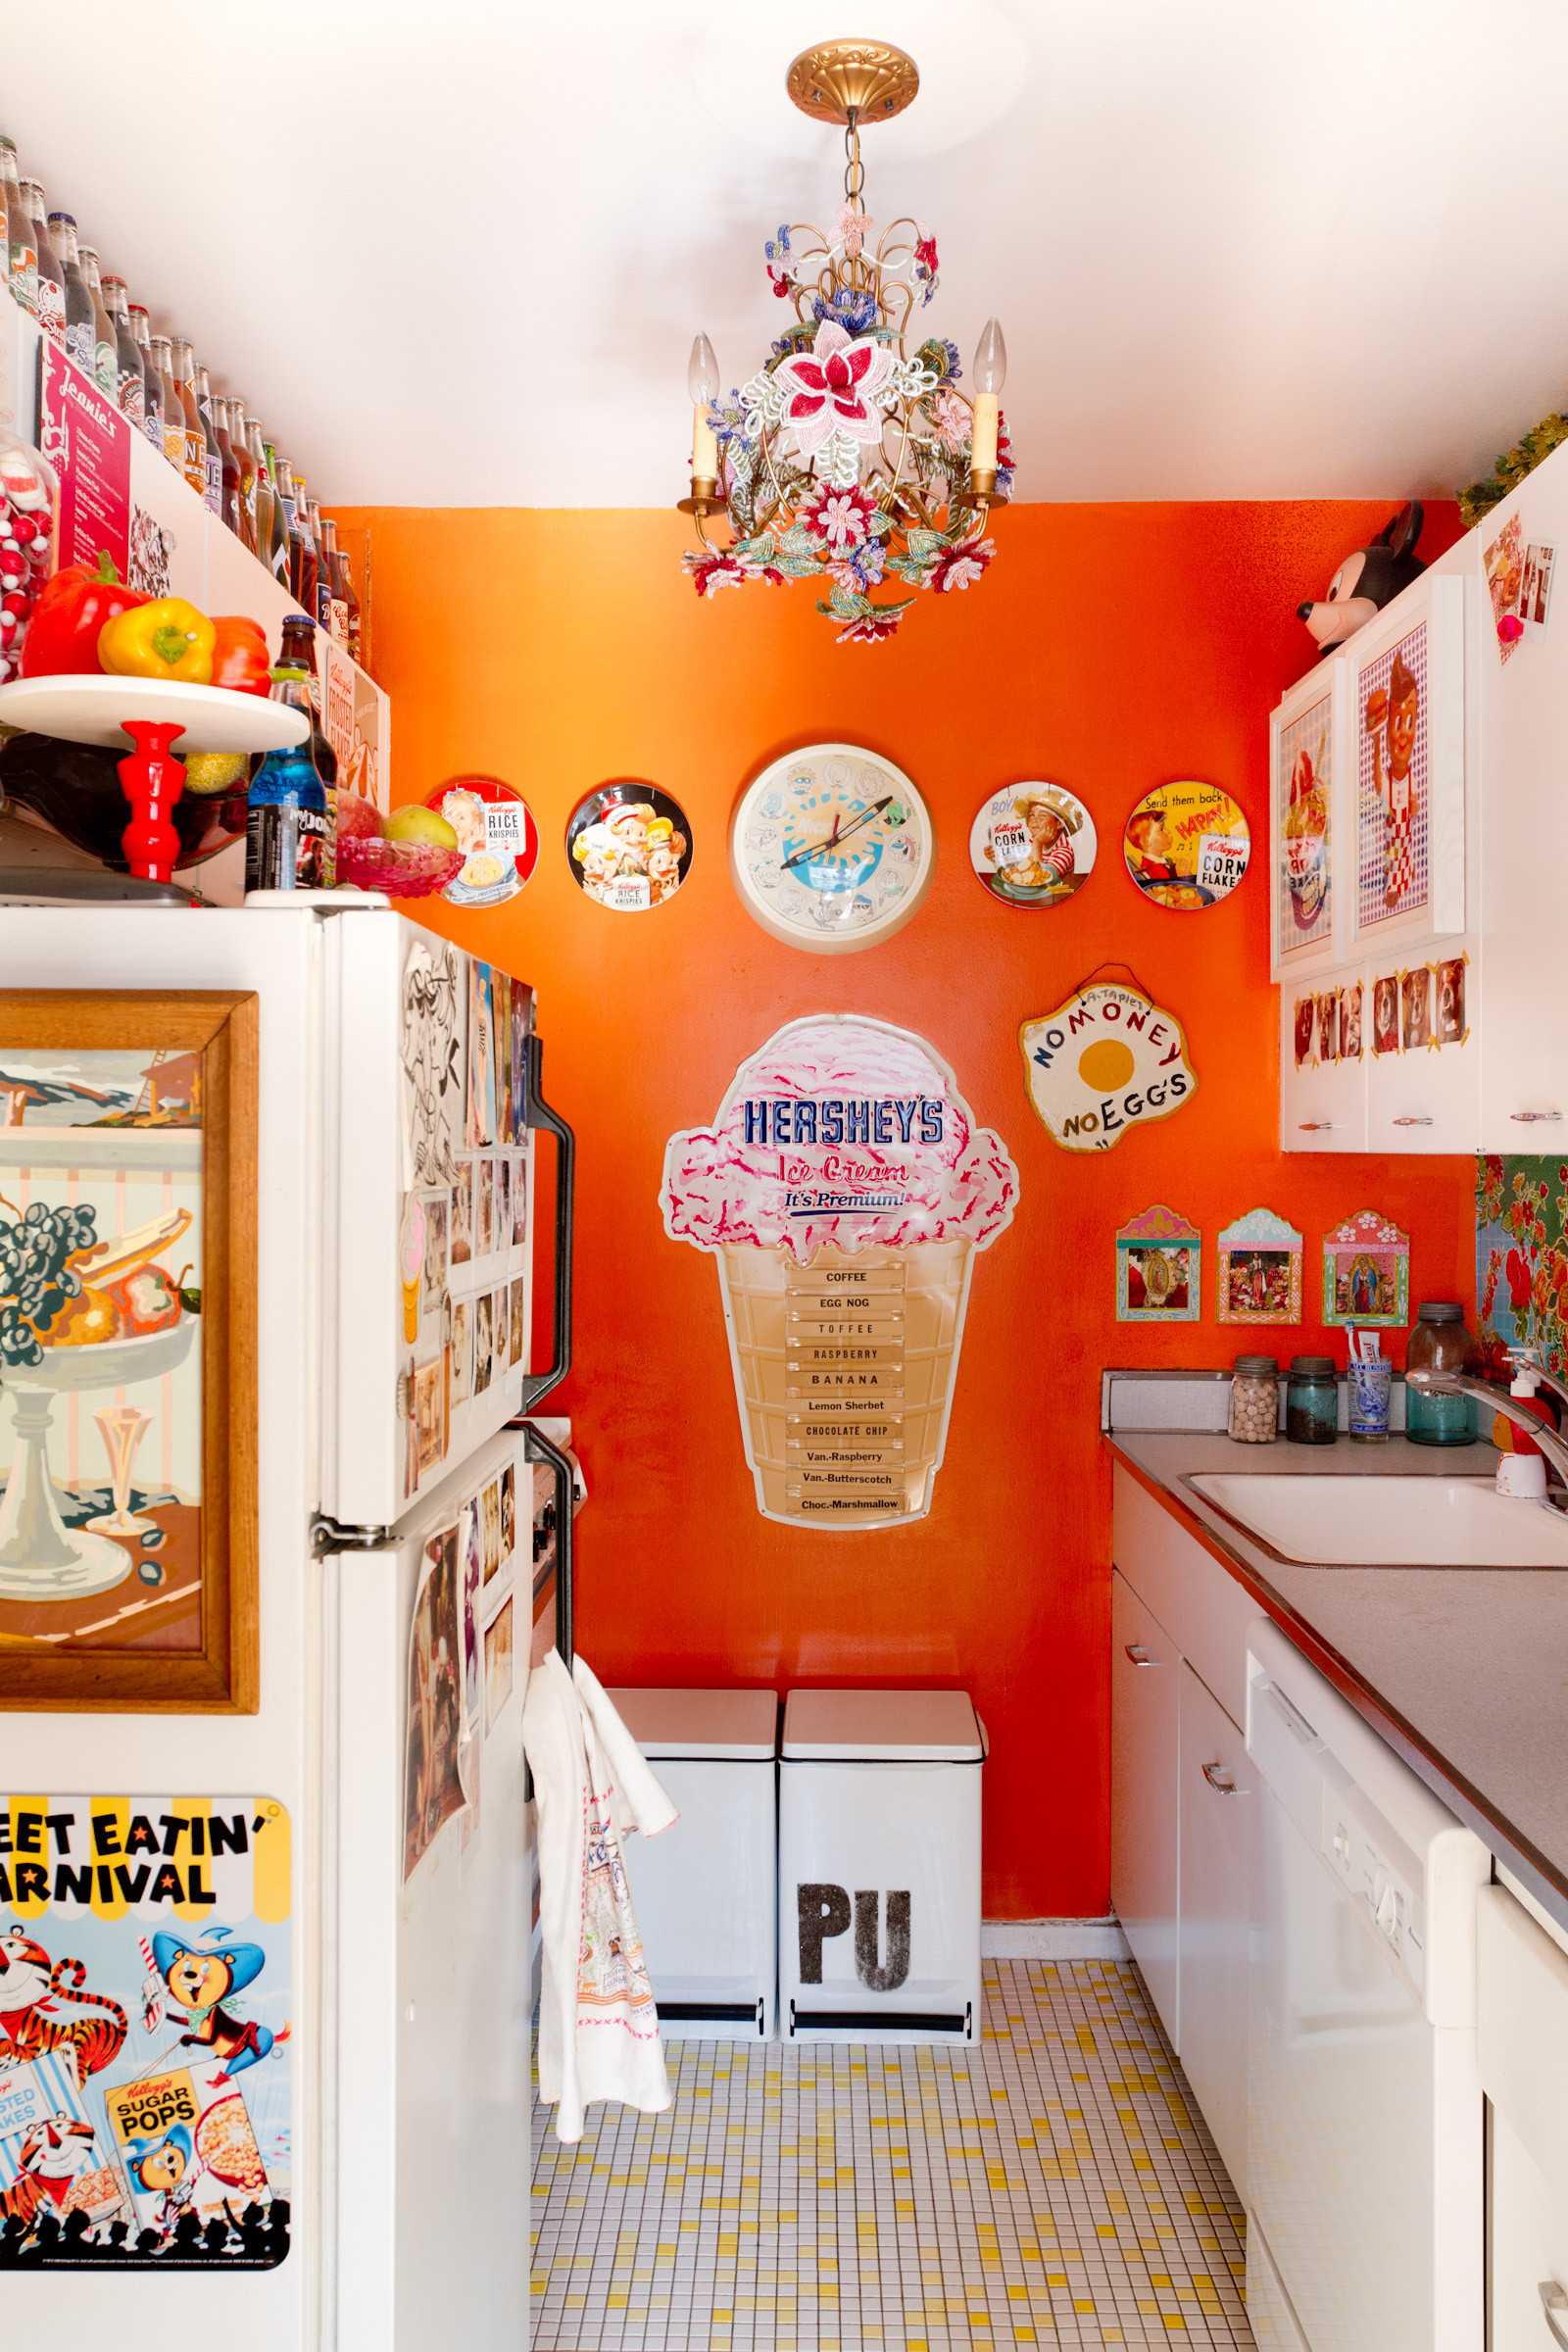 https://st.hzcdn.com/simgs/pictures/kitchens/my-houzz-candy-colored-collections-wow-in-manhattan-rikki-snyder-img~ed816e0d02797984_14-3184-1-8a4256a.jpg